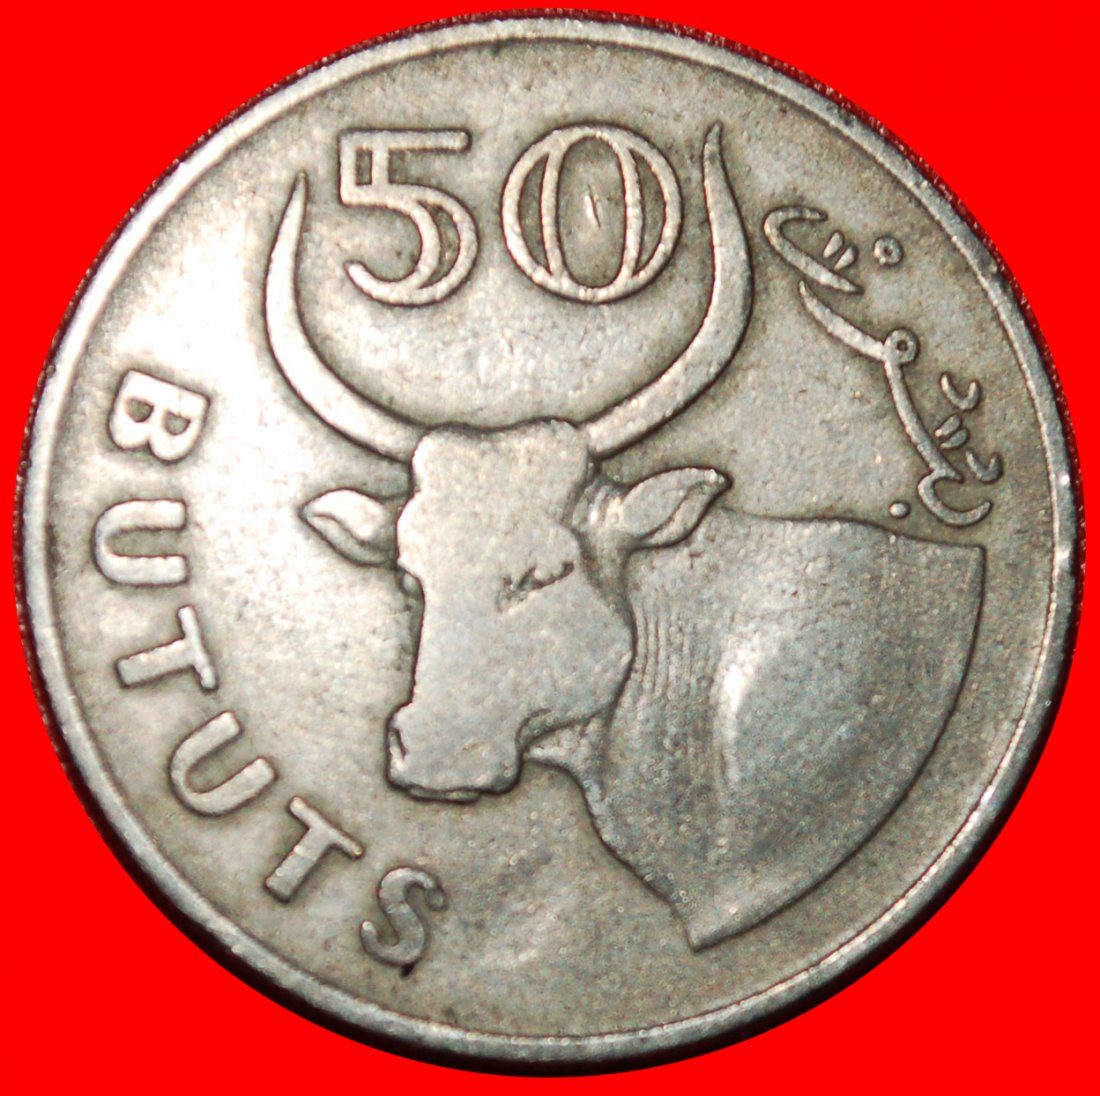  * BULL: THE GAMBIA ★ 50 BUTUTS 1971!★LOW START ★ NO RESERVE!   